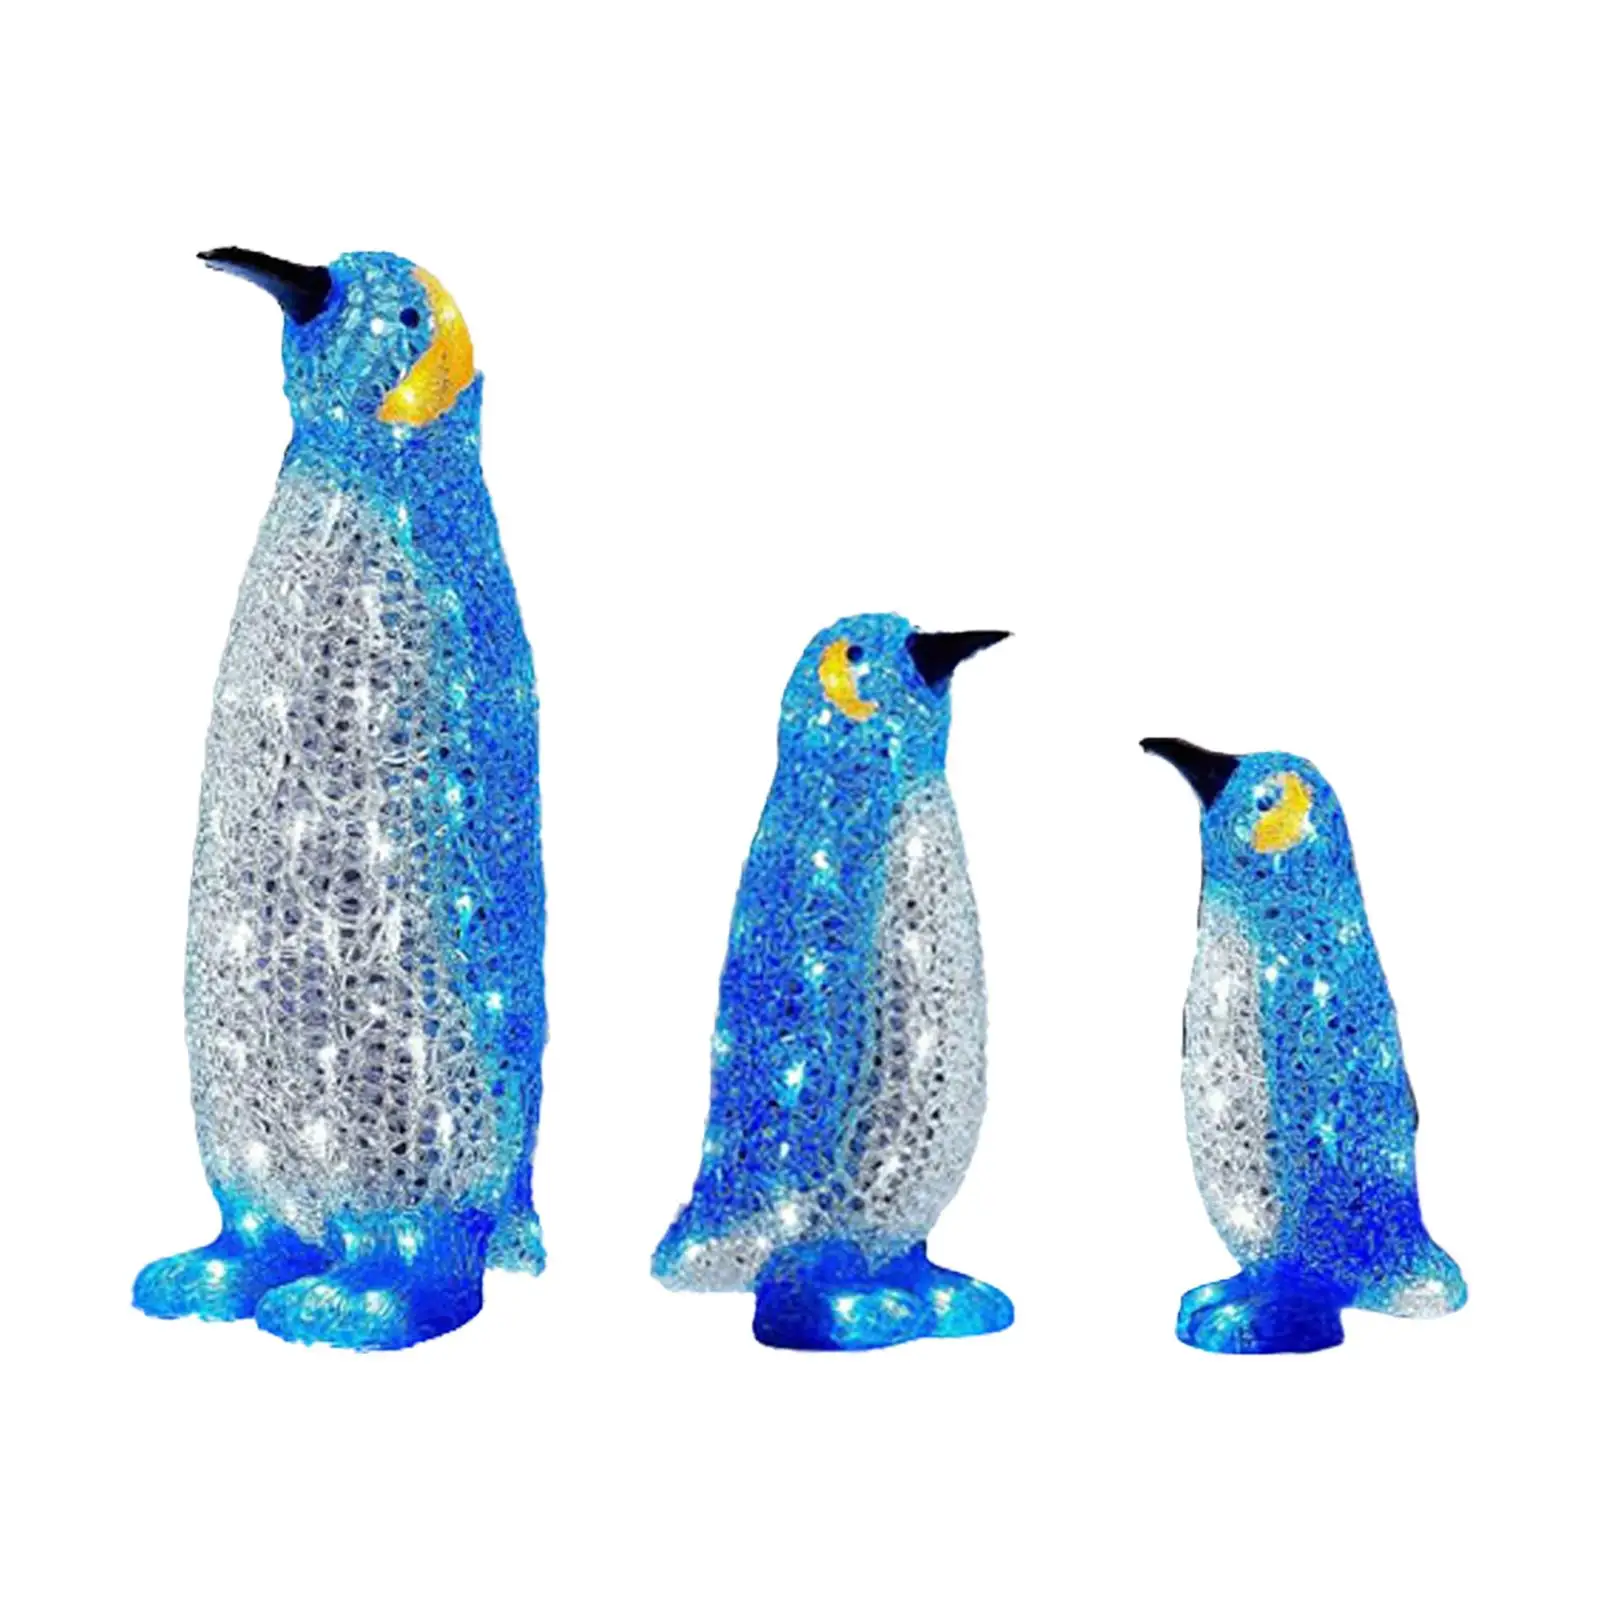 Acrylic Light Up Penguin Novelty Statue LED Penguin Lighting Figurine for Lawn Outdoor Indoor Decor Ornament